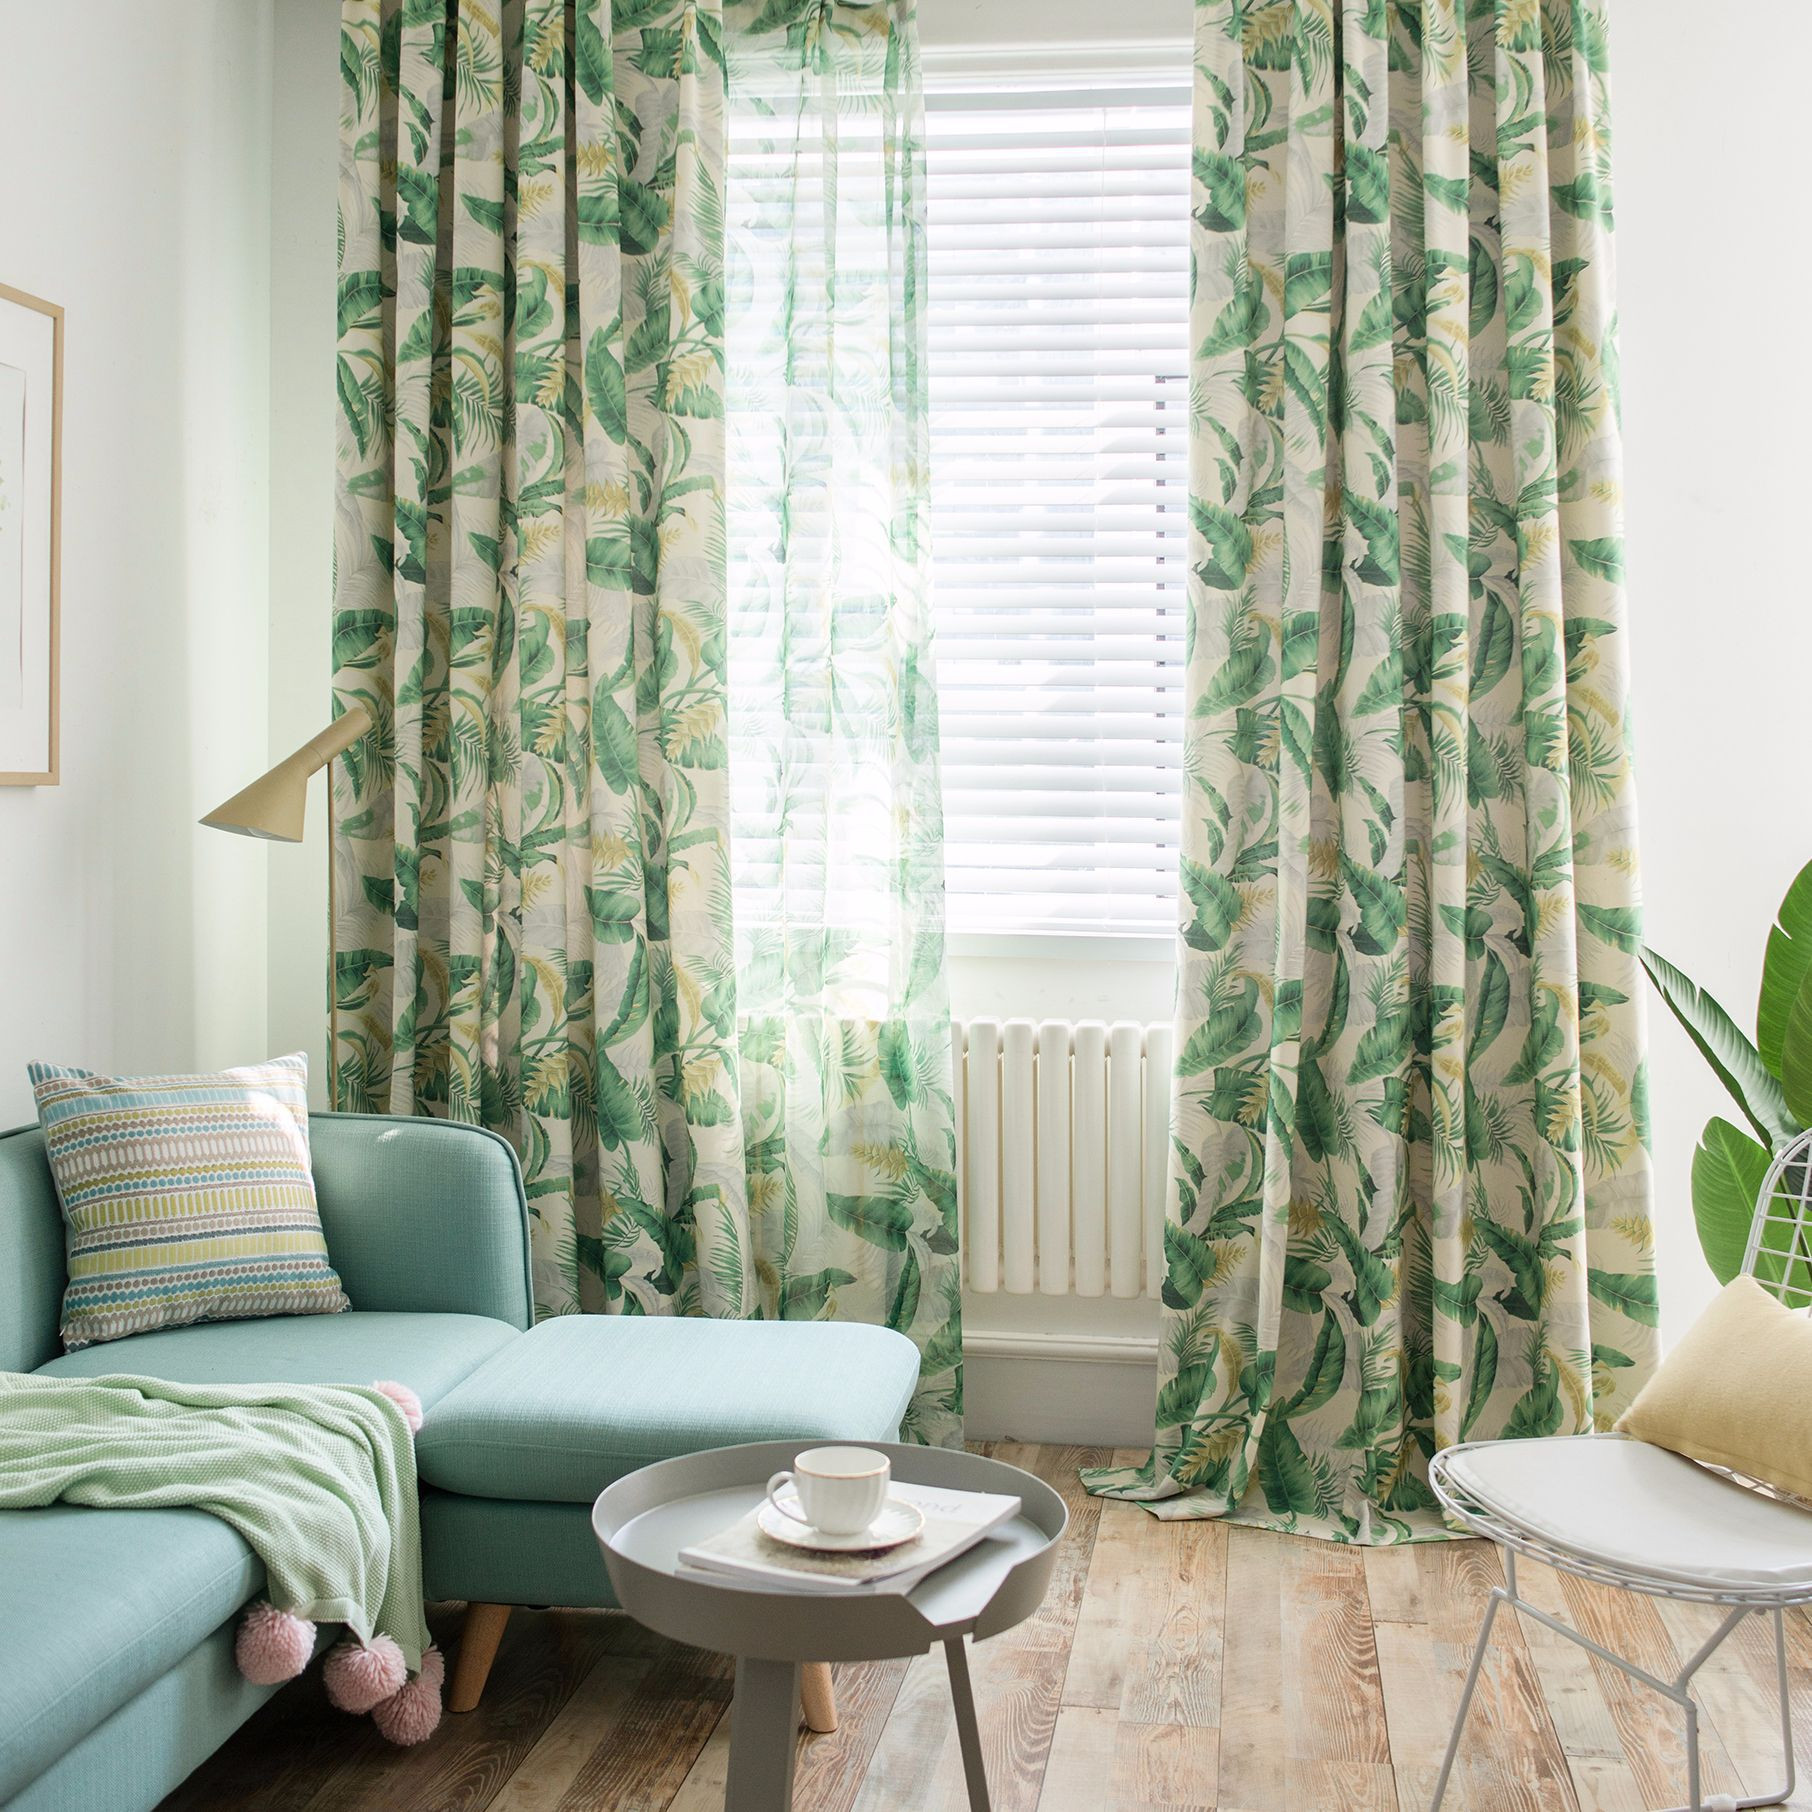 Green Living Room Curtains
 Modern Curtains for Bedroom Living Room Leaf Printed Green